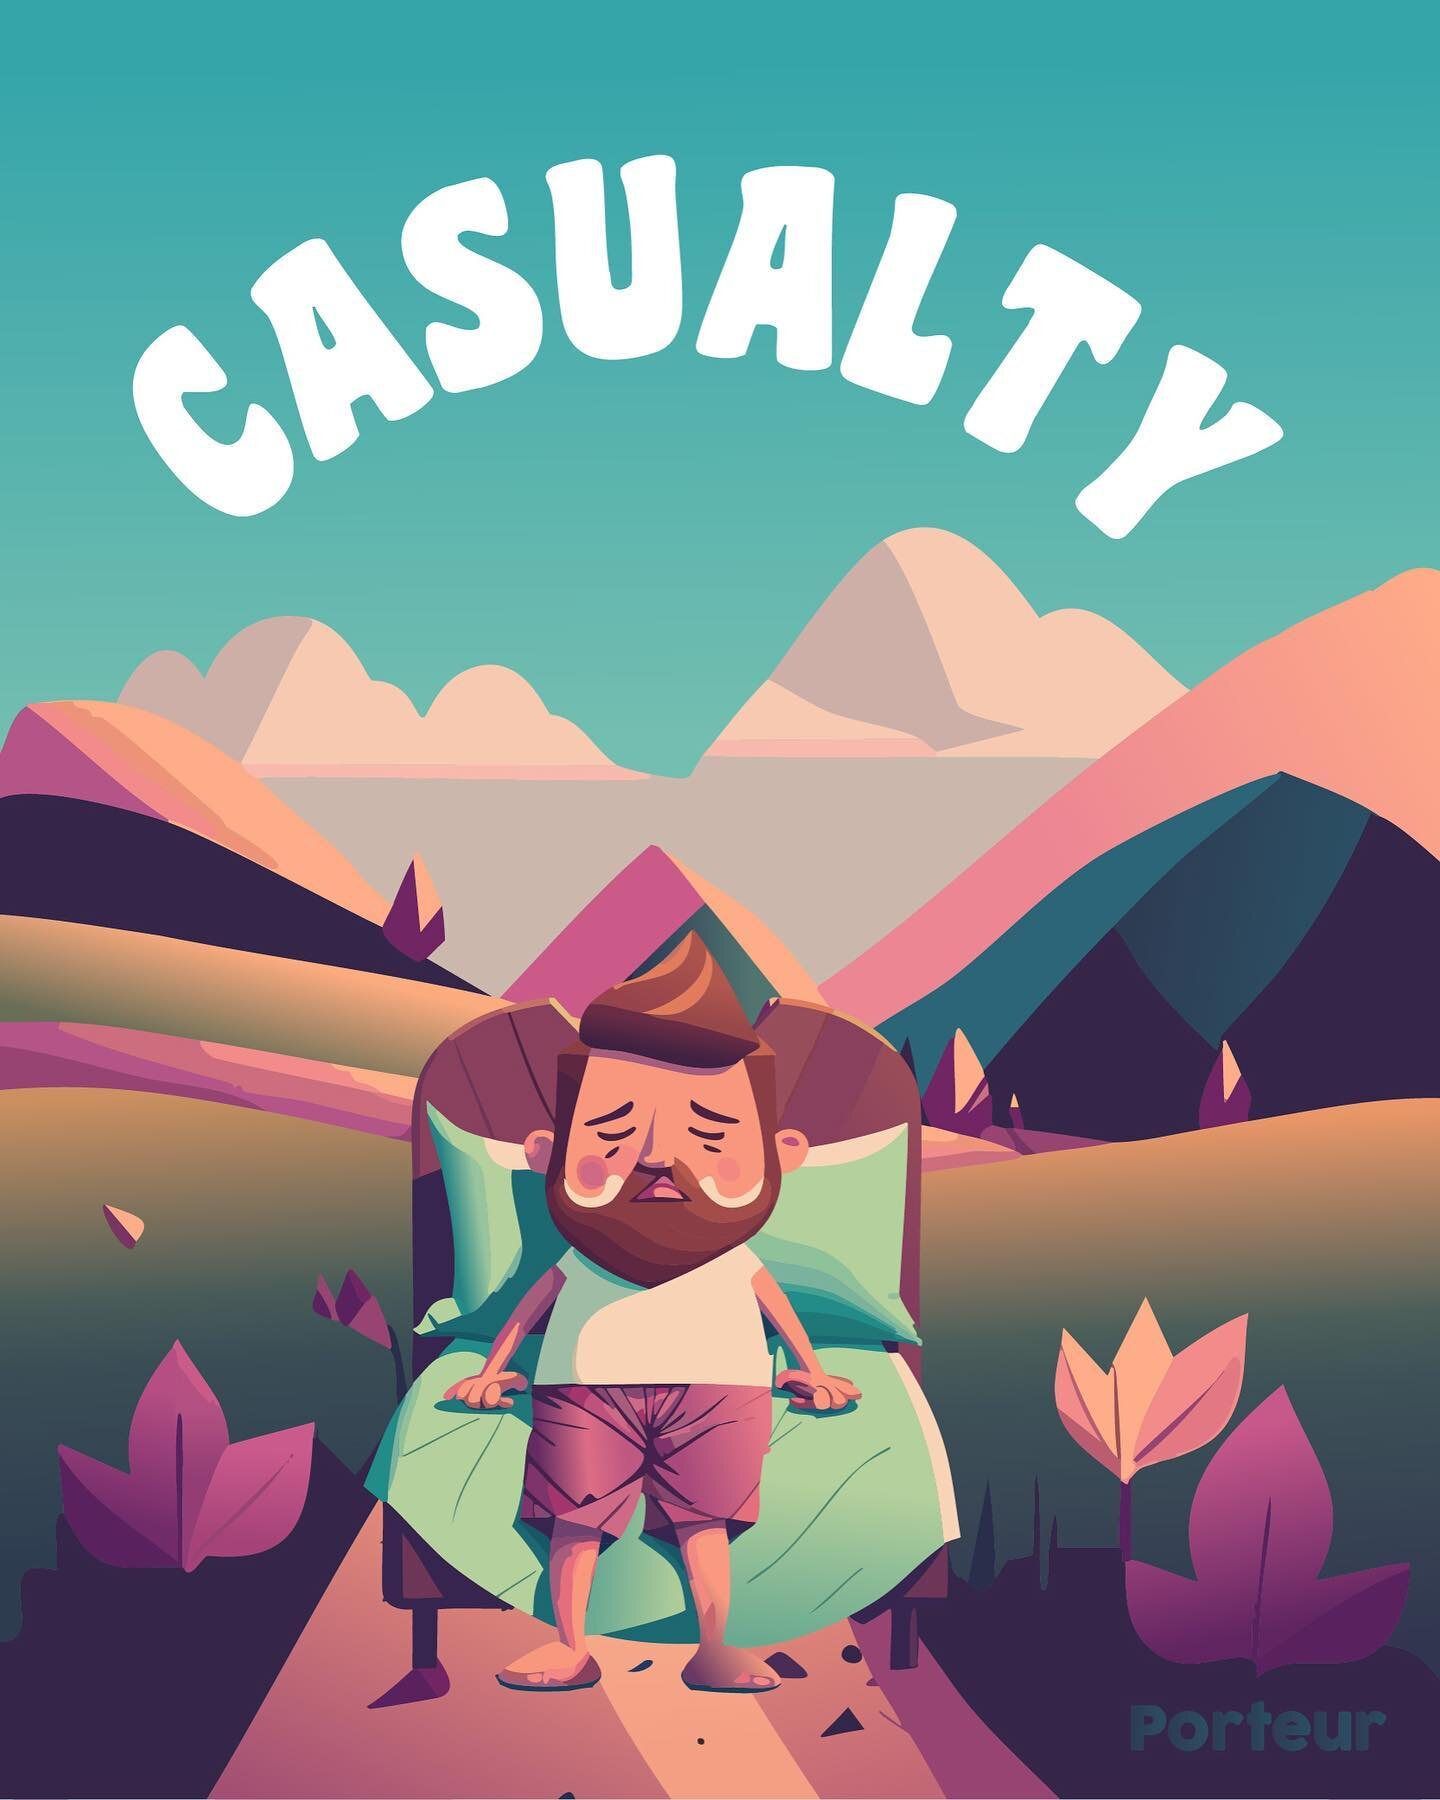 Sadly no Midweek Casuals tonight! The great leader has been struck with illness. Hopefully back up next week. Stay Casual.